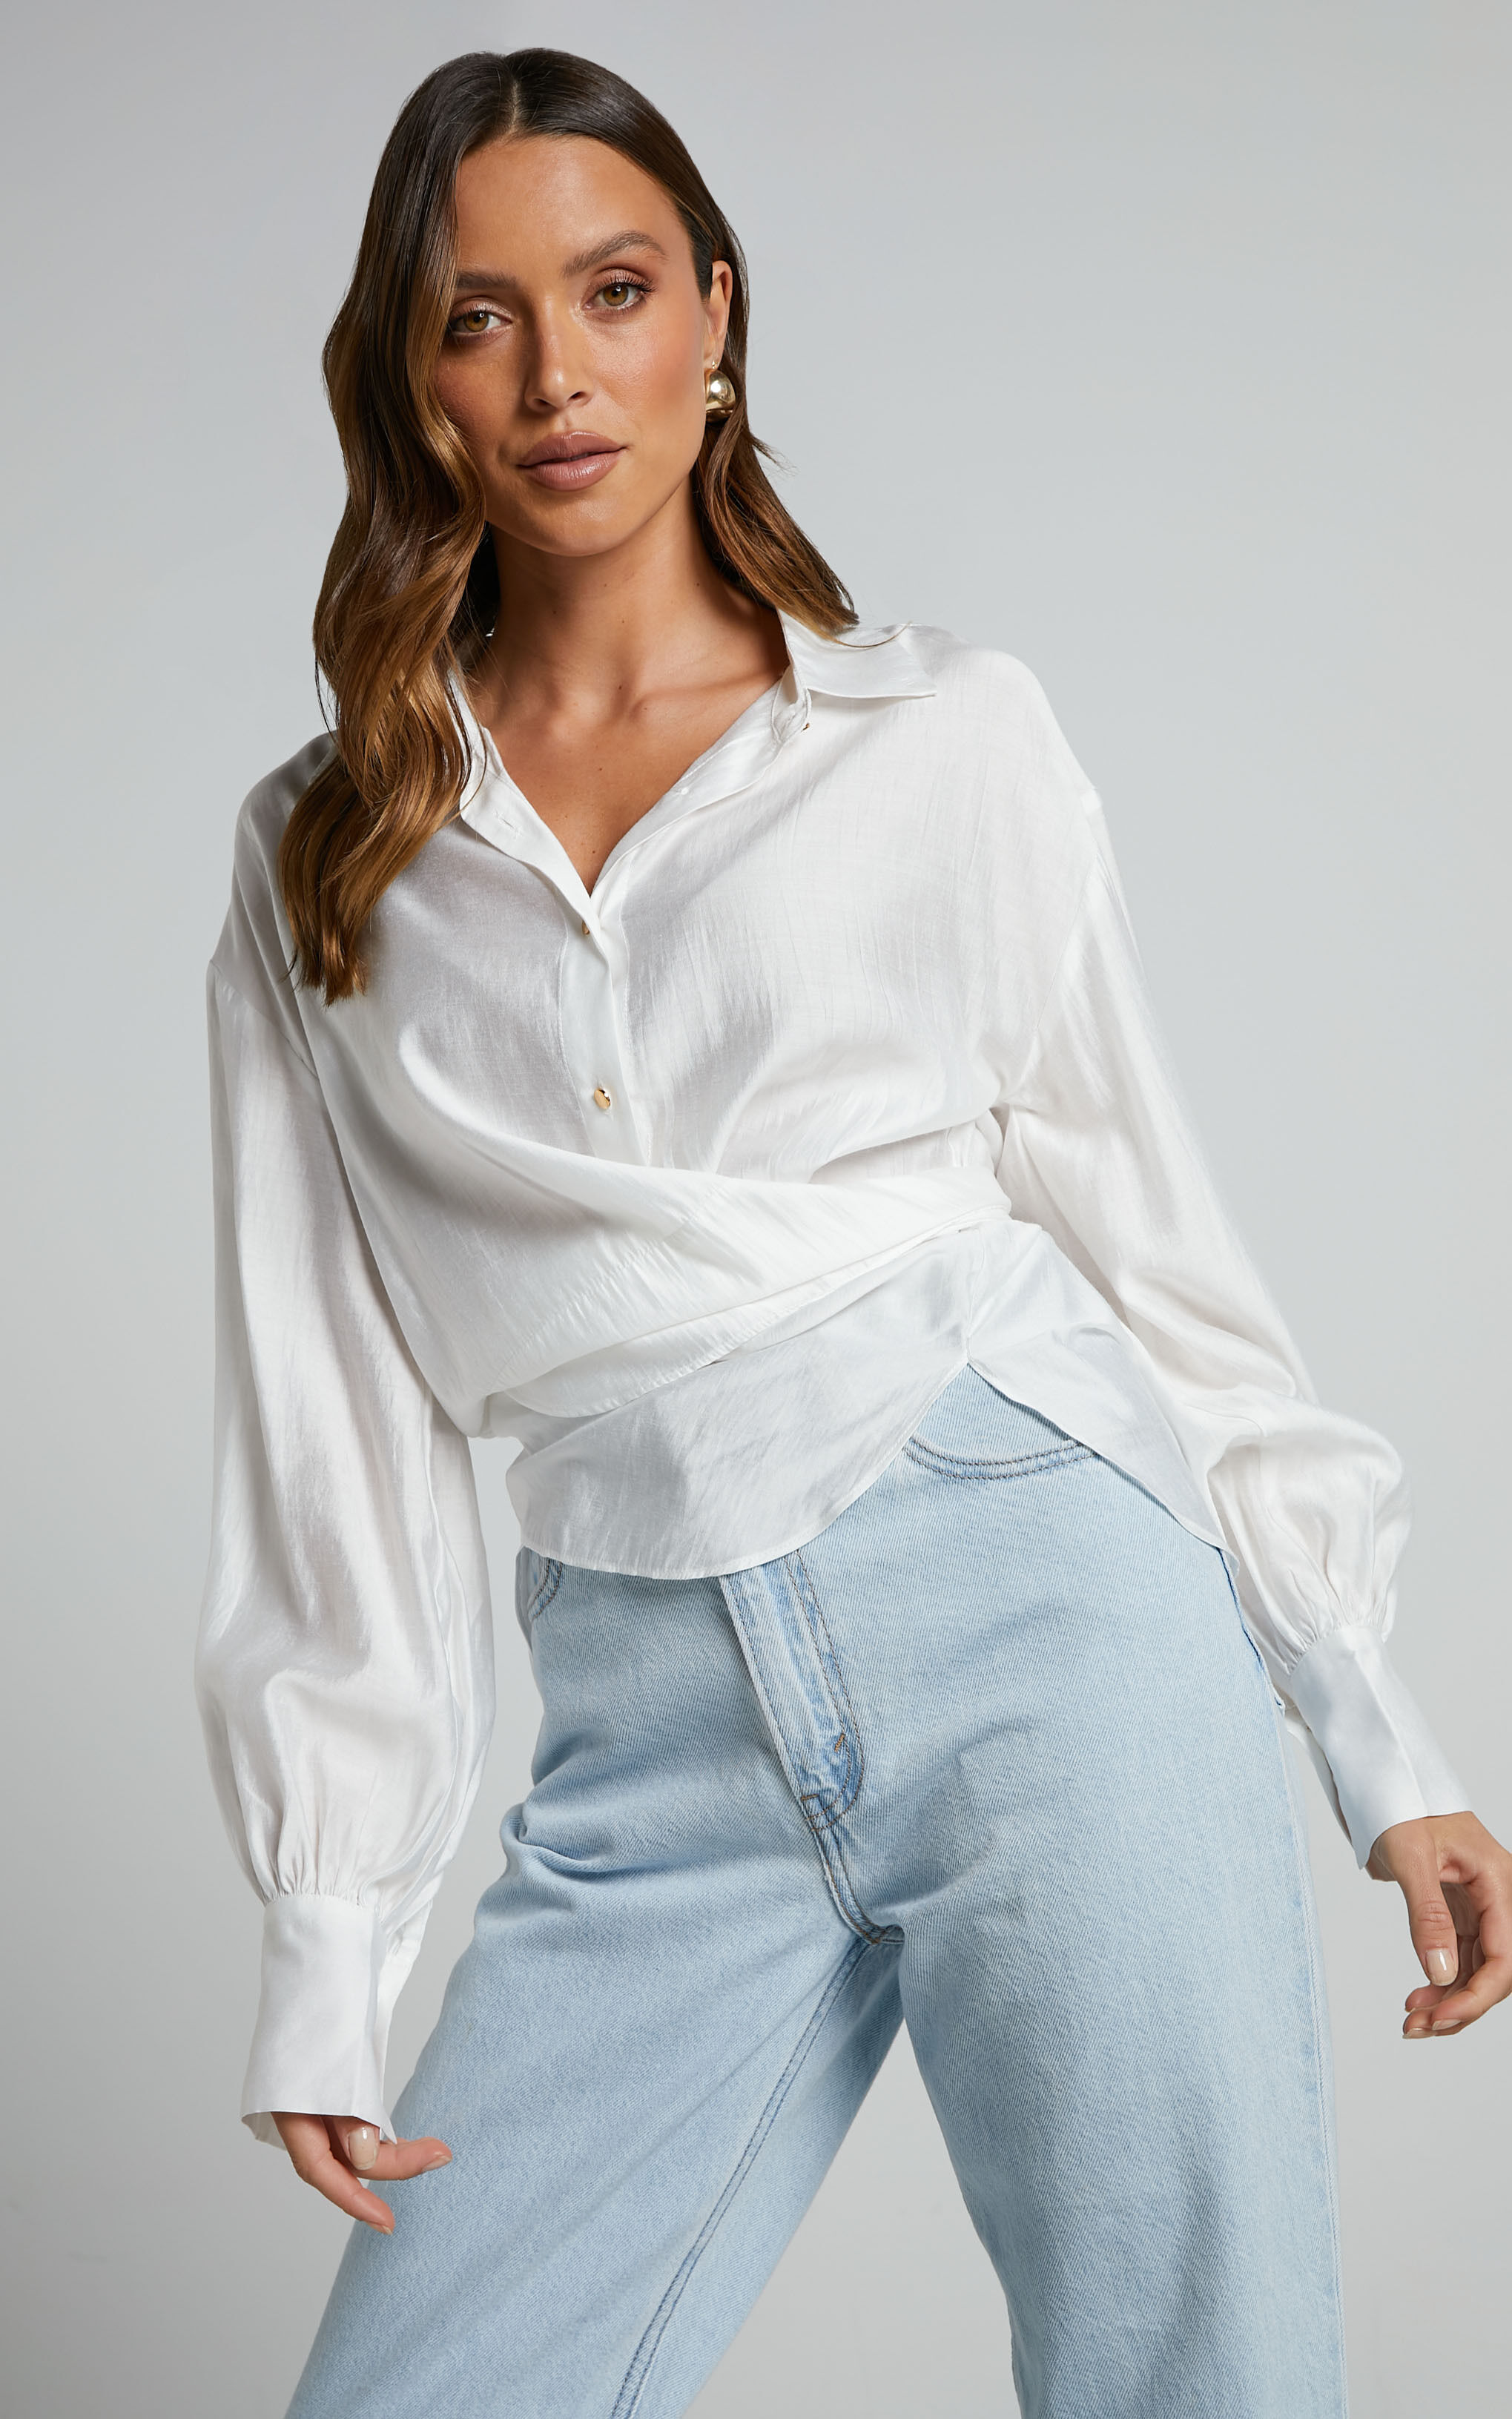 Ehrna Twist Front Collared Long Sleeve Shirt in White - 04, WHT3, super-hi-res image number null